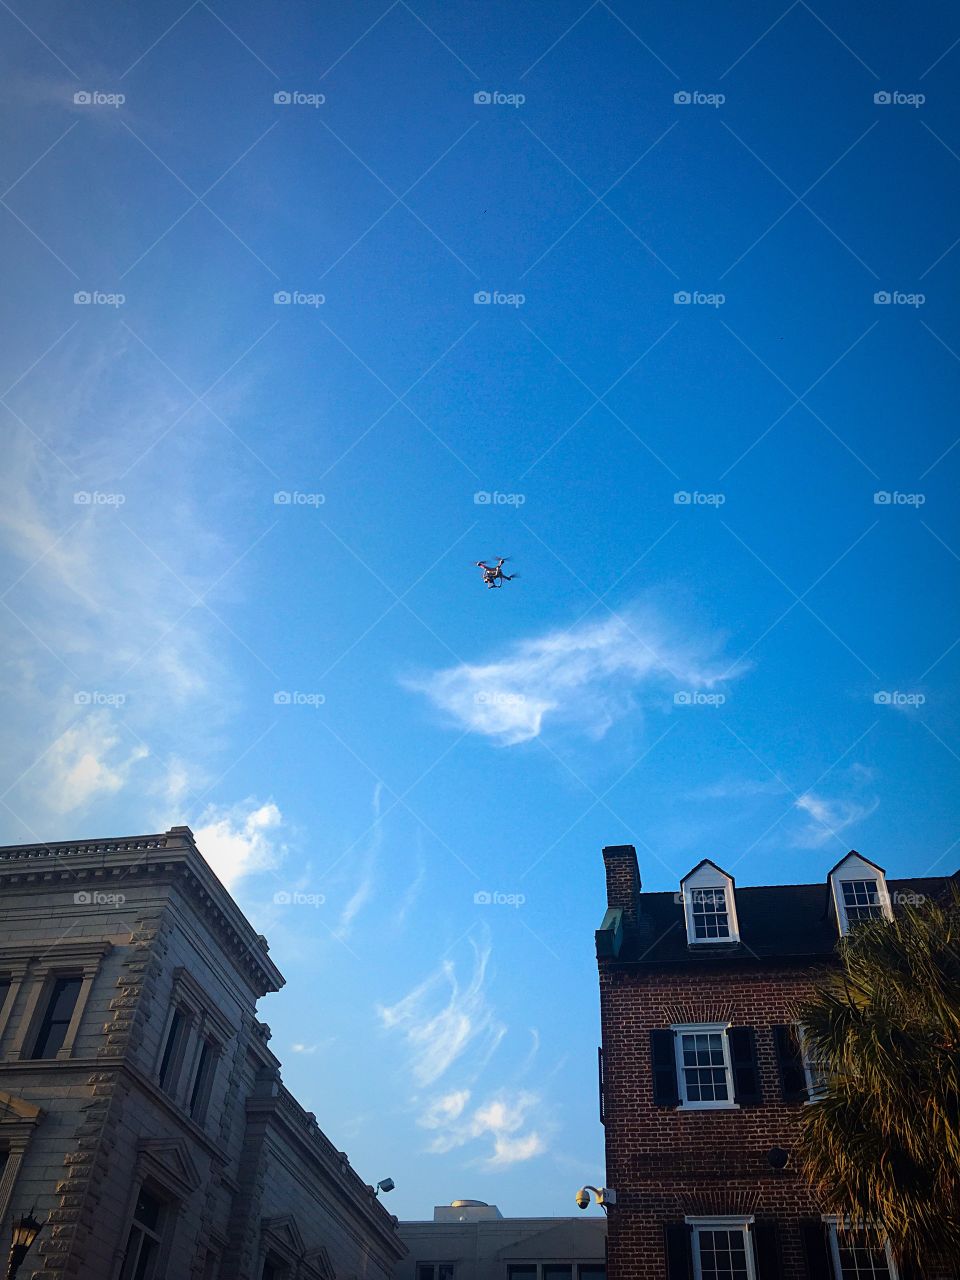 Drone over Charleston. Old meets new